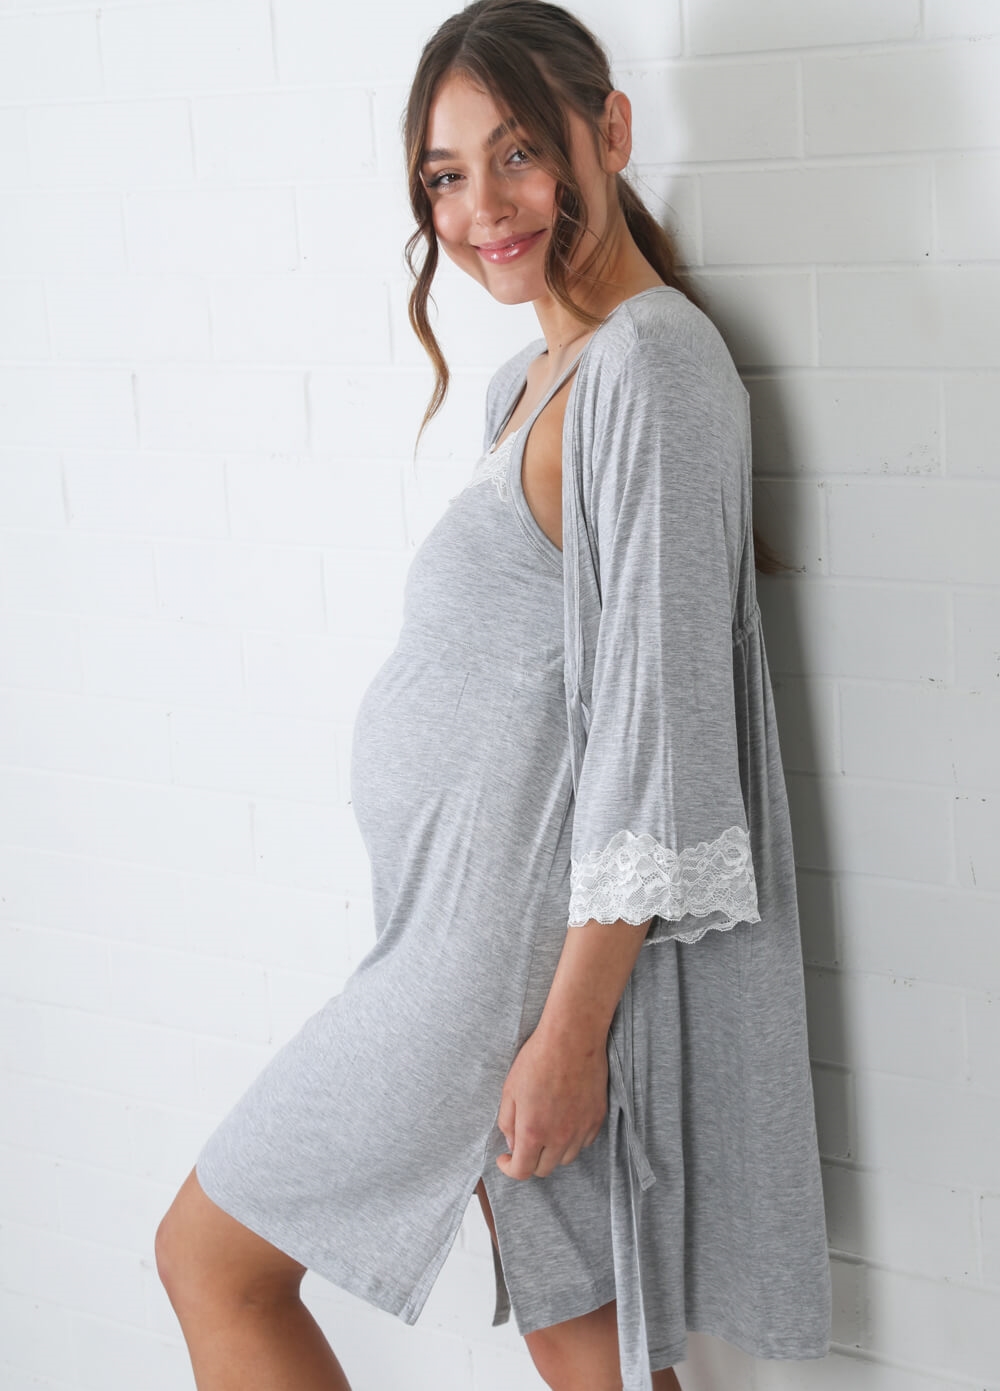 L'amore Womens Hospital Maternity Nightgown Pregnancy